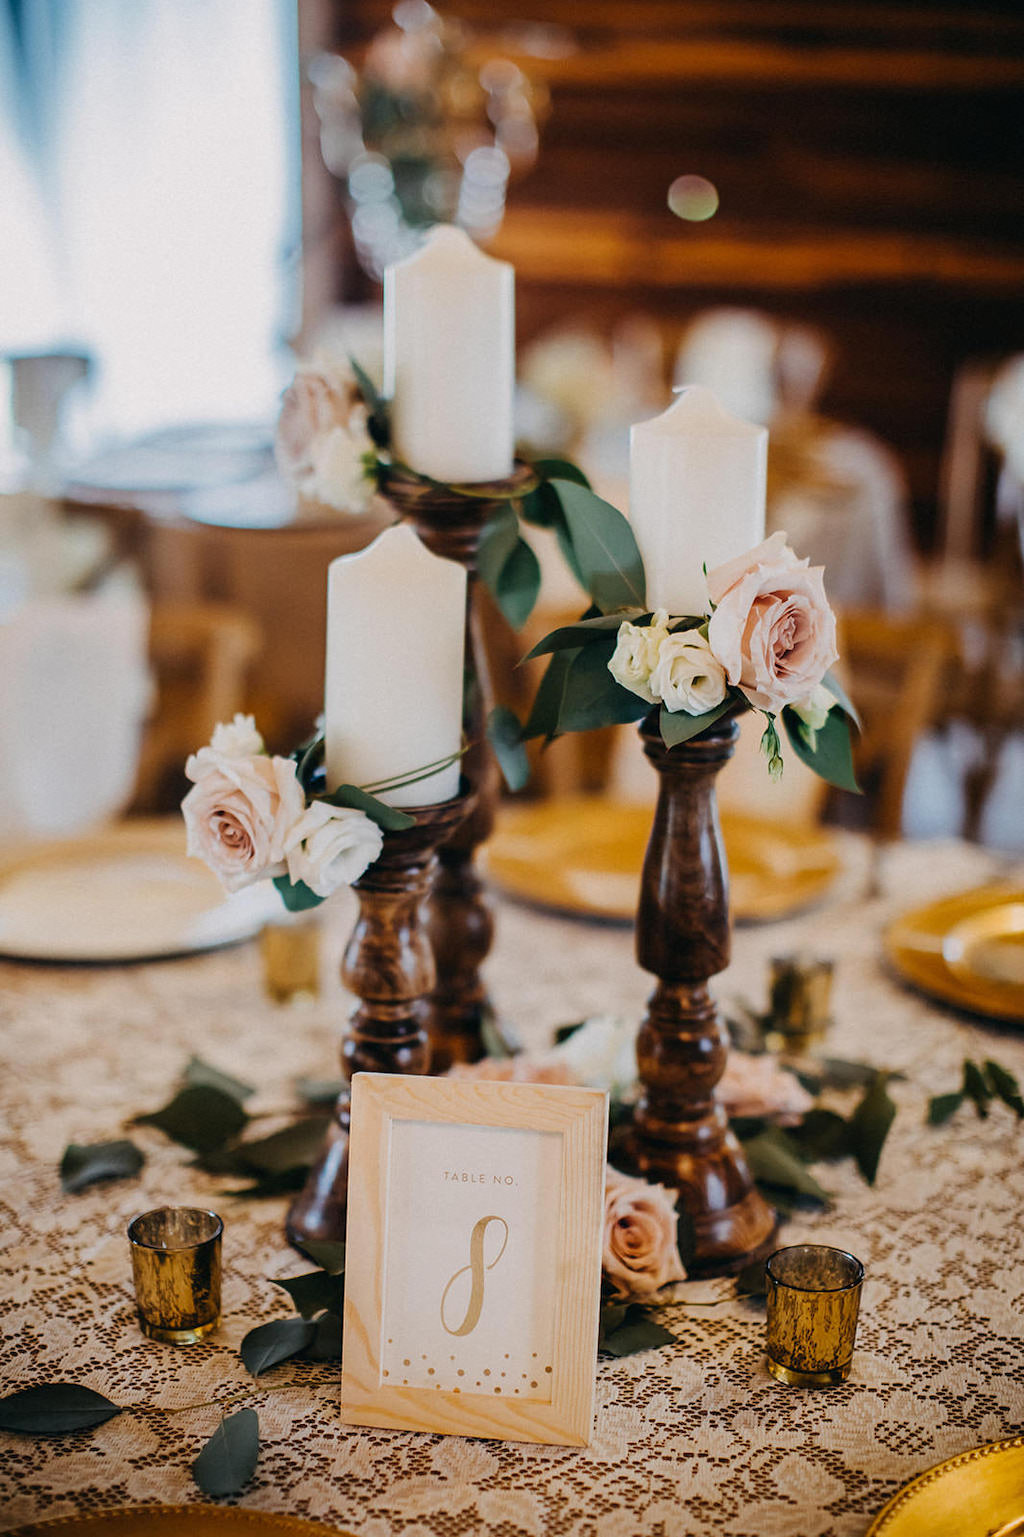 Florida Rustic Barn Wedding Reception Decor, Wooden Candlesticks, Ivory Roses and Wooden Frame Table Number